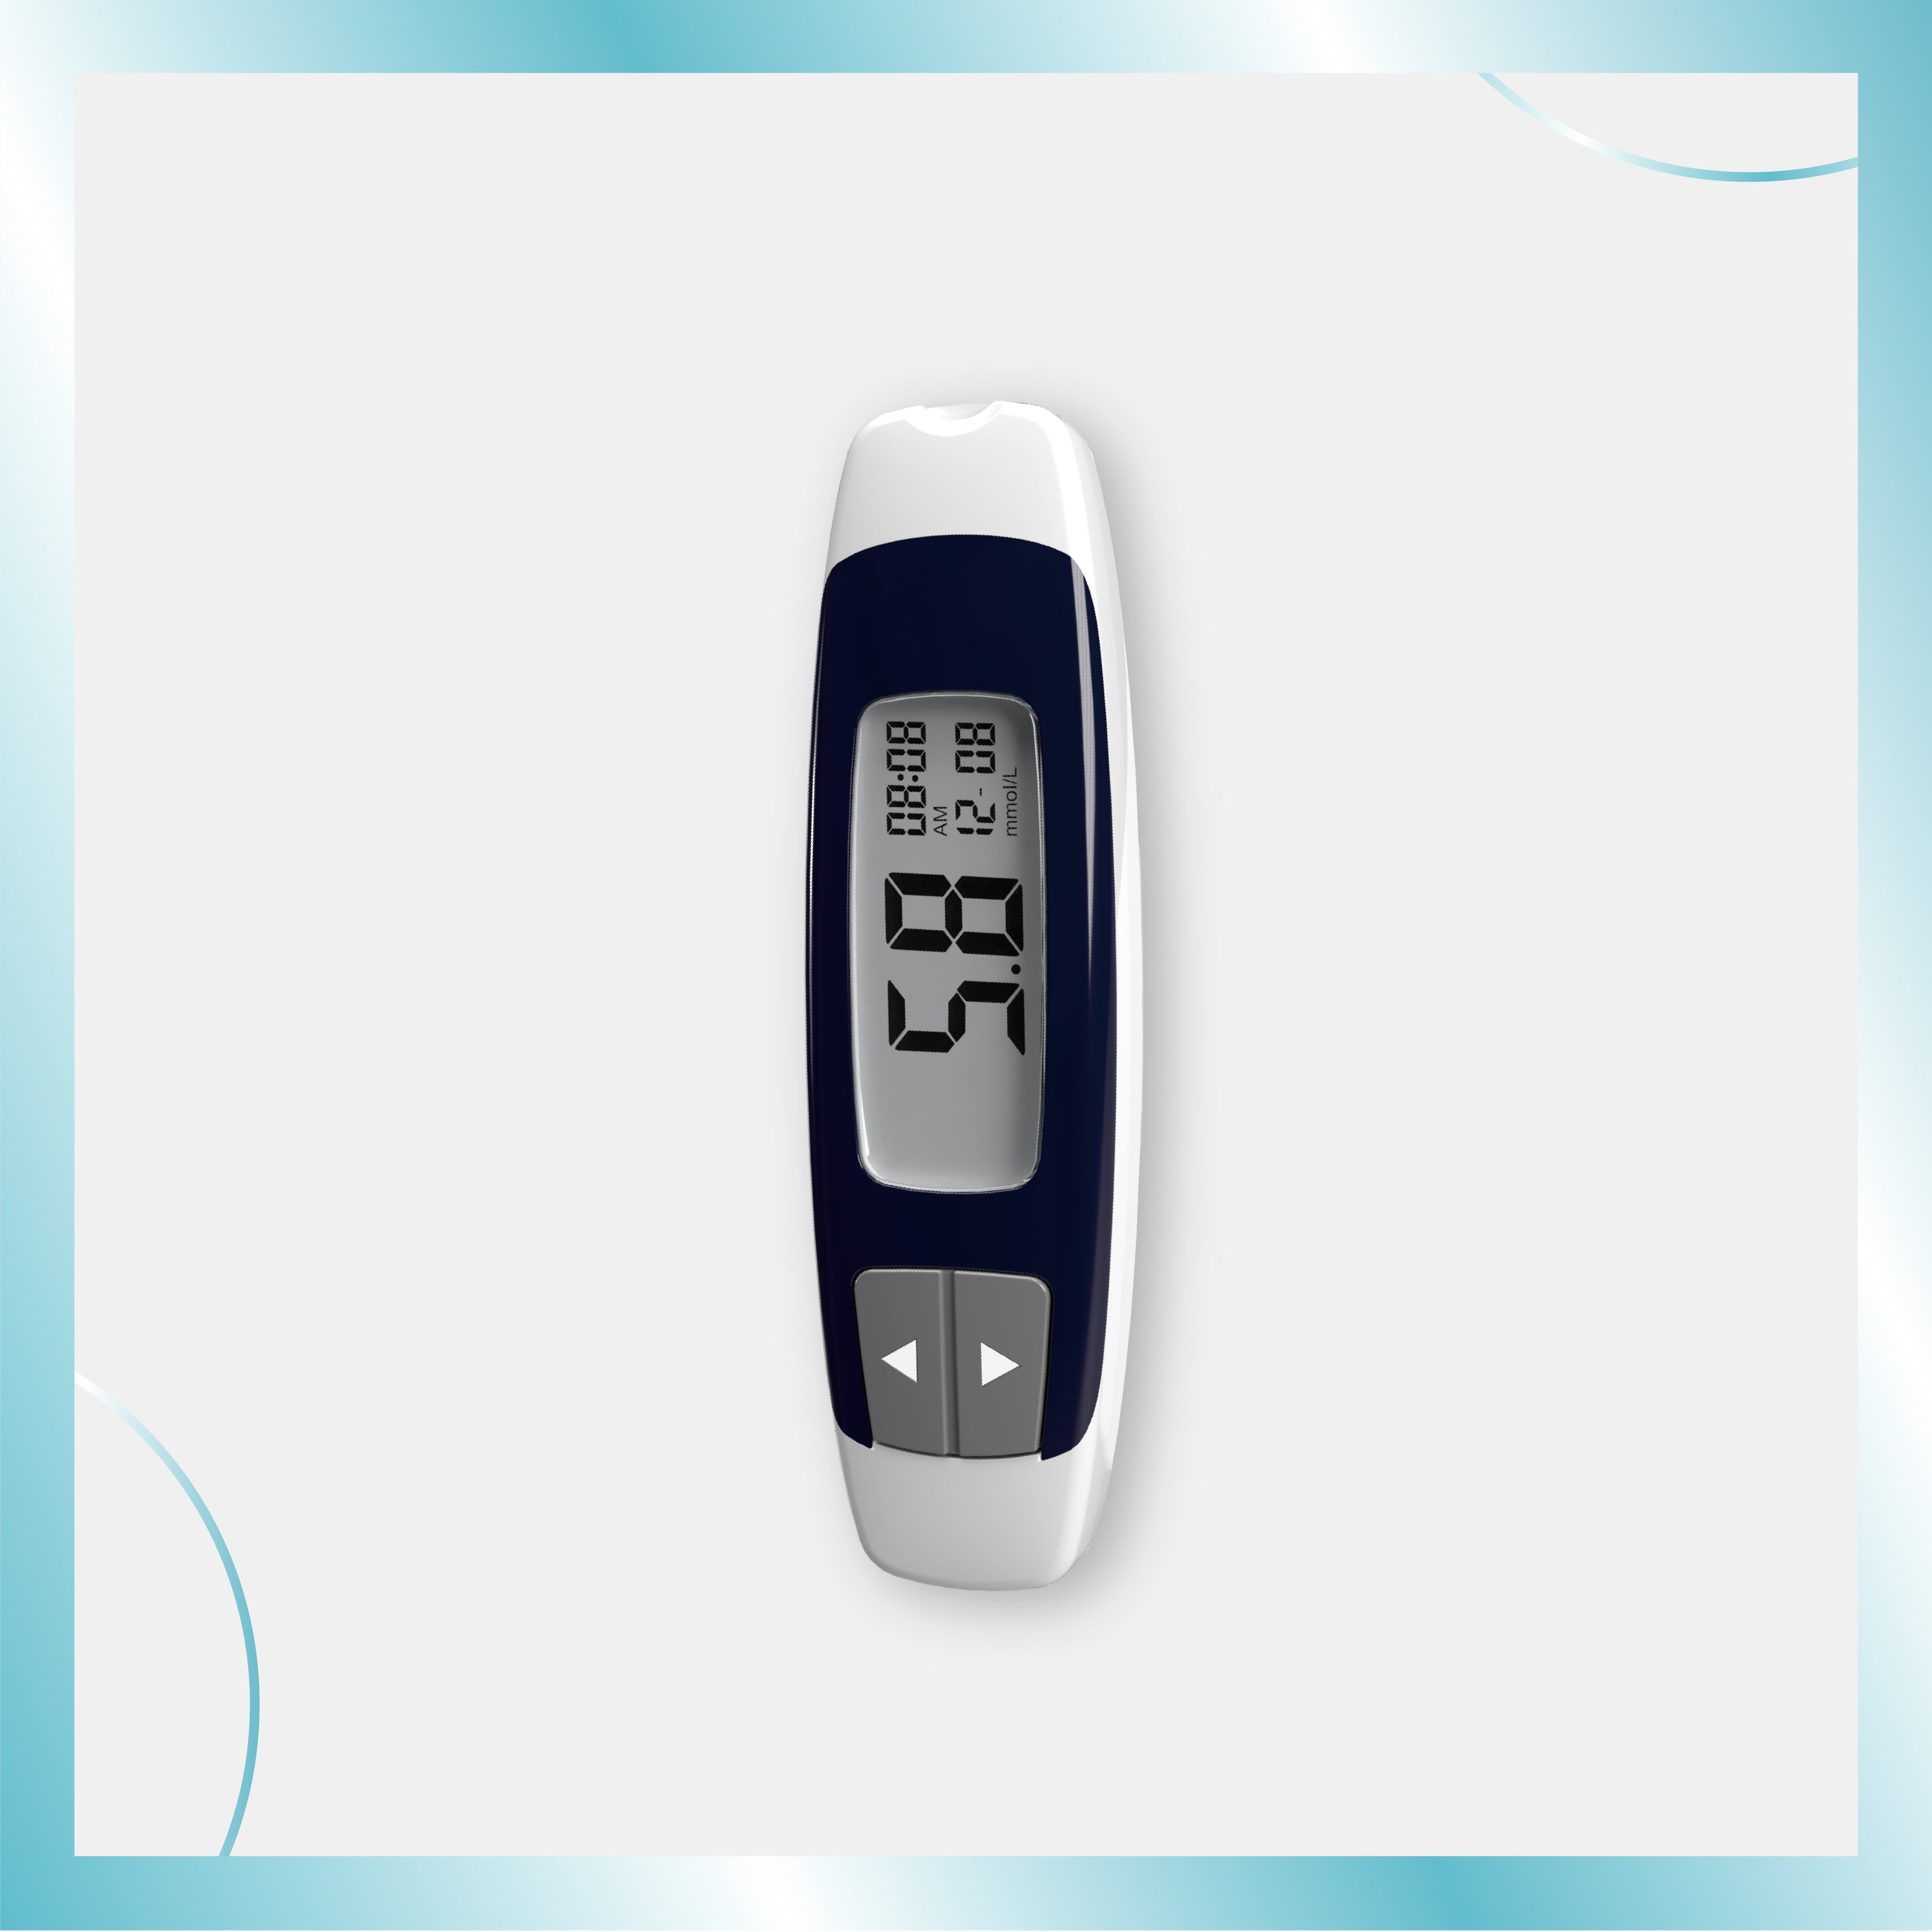 Blood Glucose Monitoring System-203